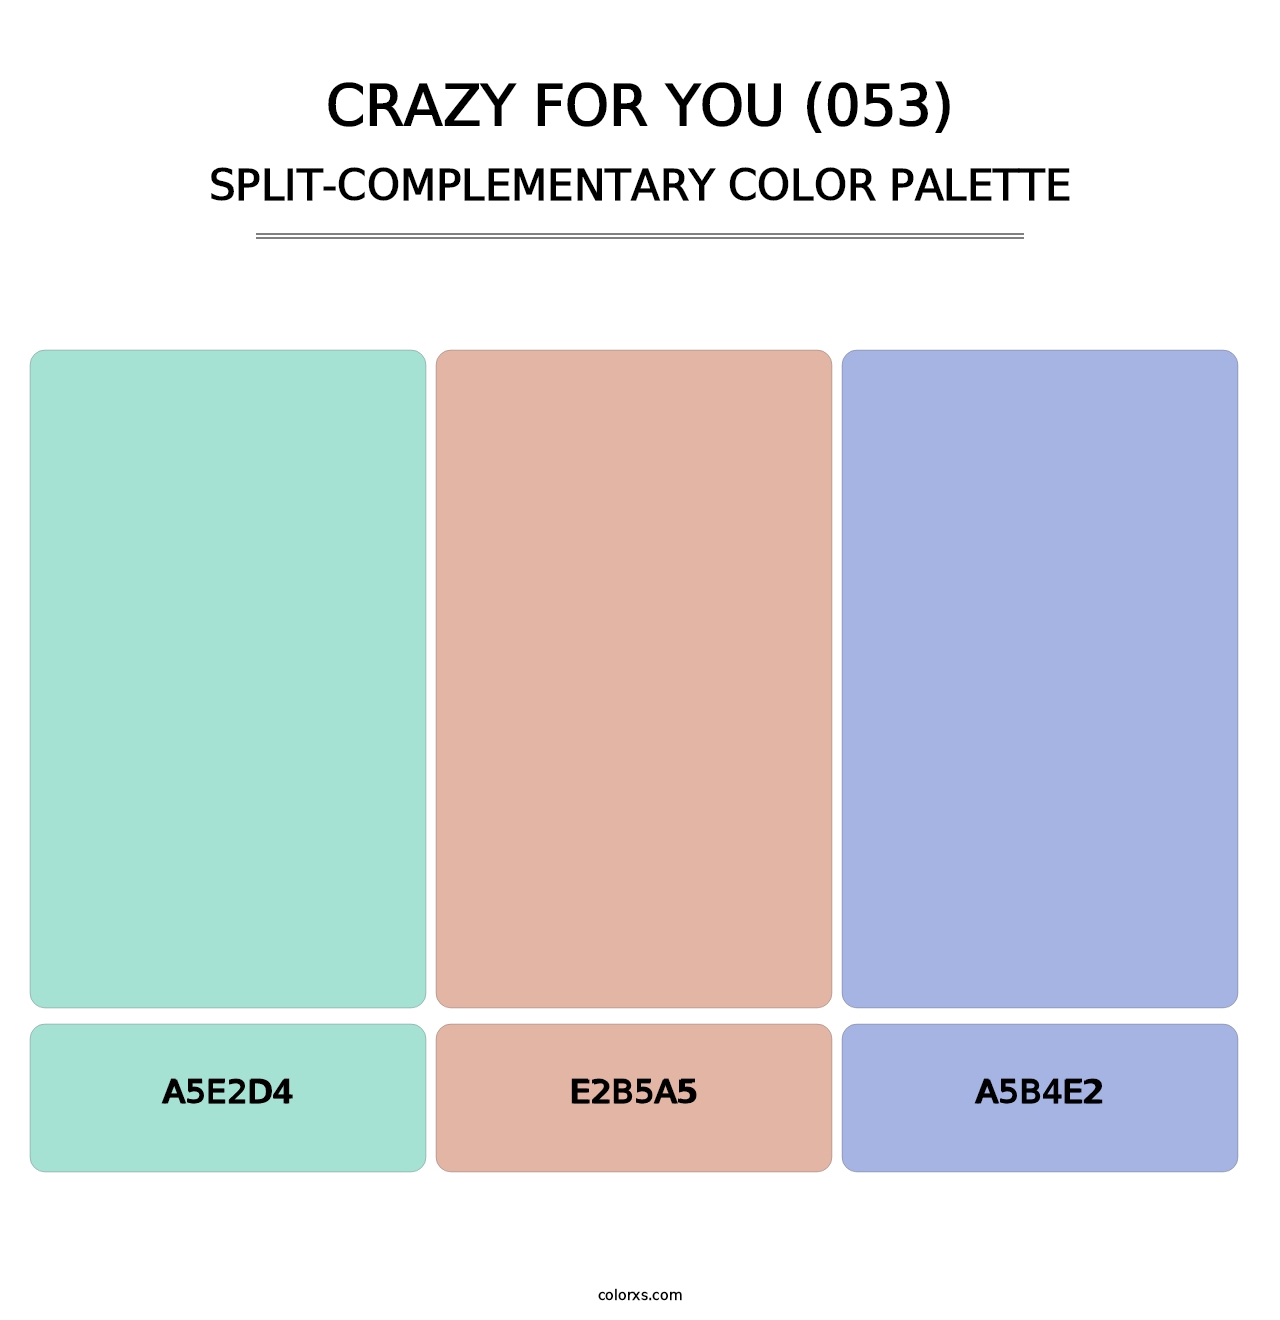 Crazy For You (053) - Split-Complementary Color Palette